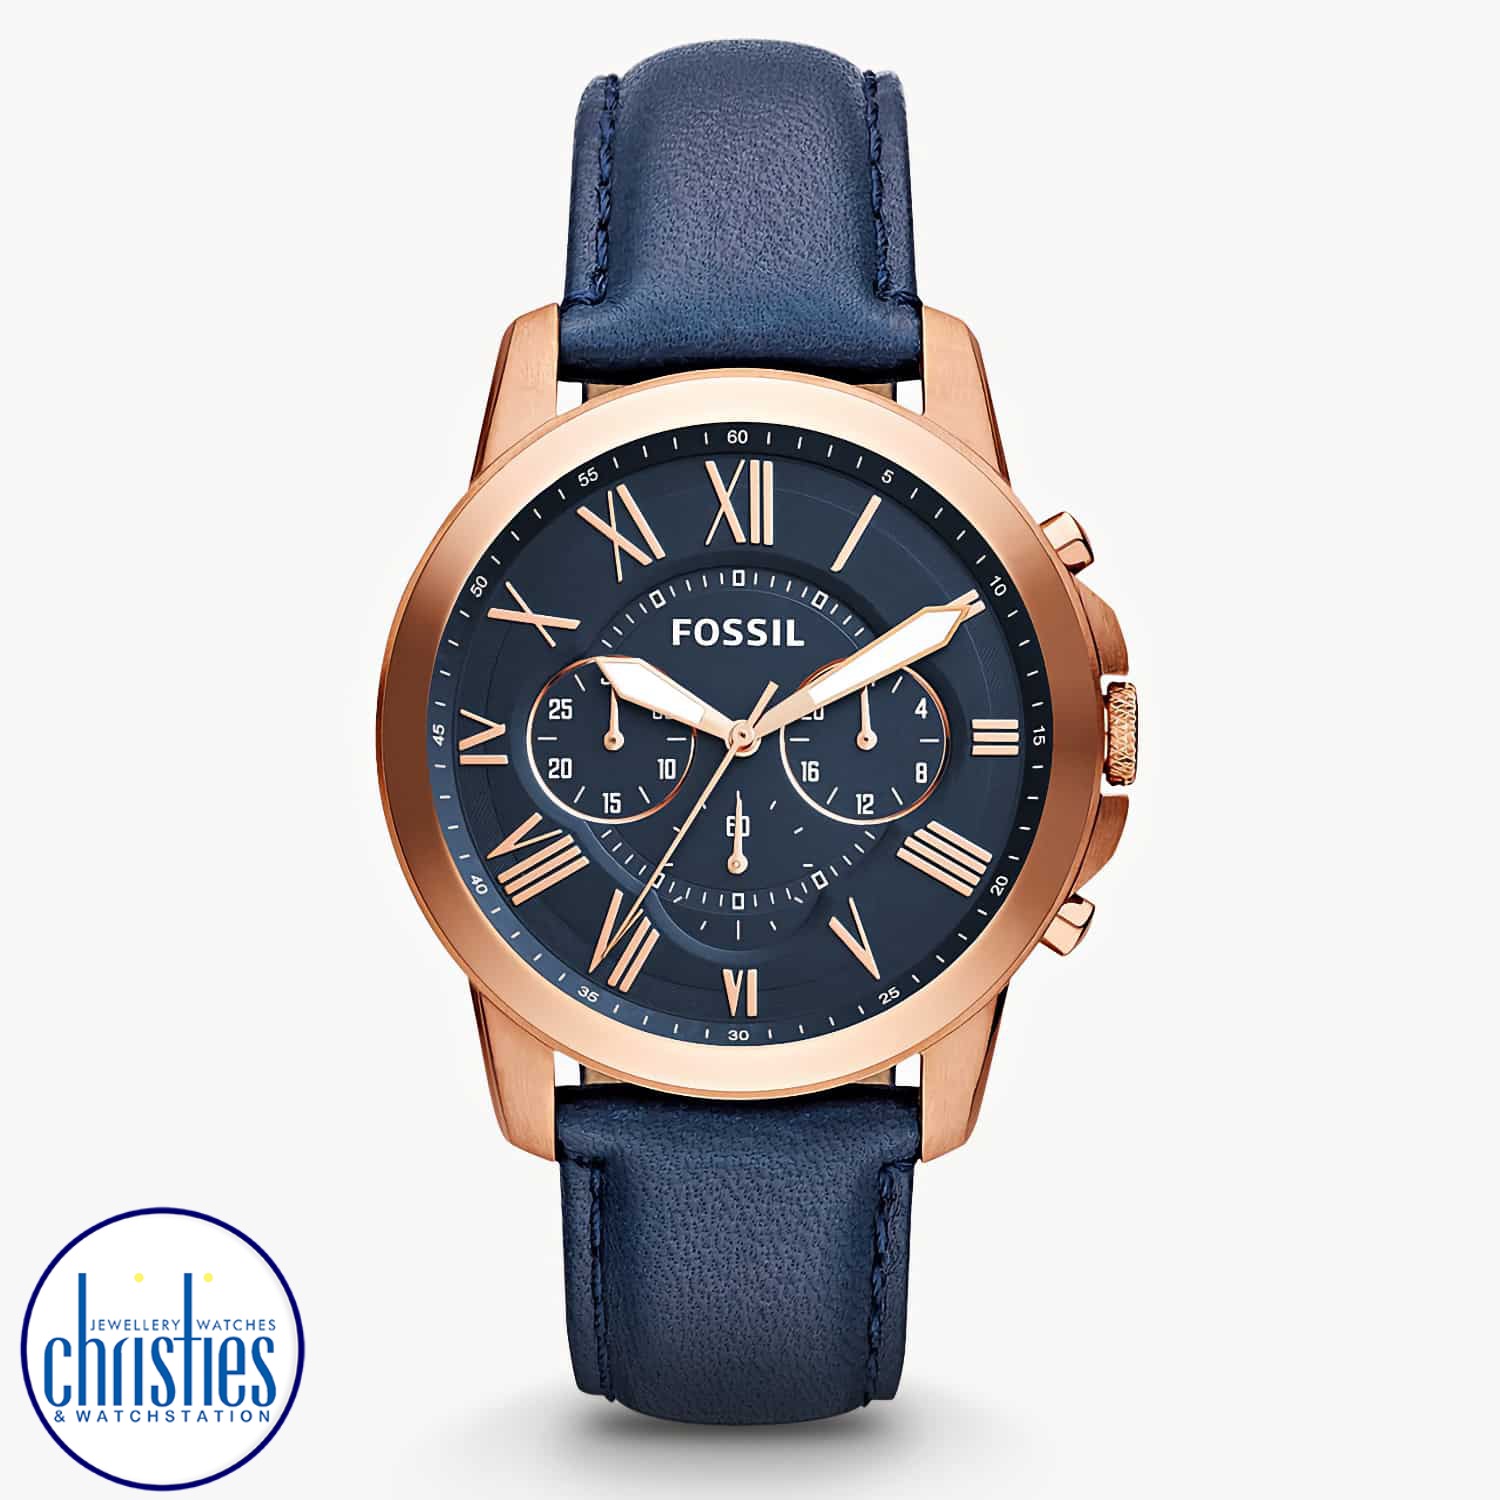 FS4835IE Fossil Grant Chronograph Black Leather Watch. FS4835IE Fossil Grant Chronograph Black Leather Watch Afterpay - Split your purchase into 4 instalments - Pay for your purchase over 4 instalments, due every two weeks. You’ll pay your first installme